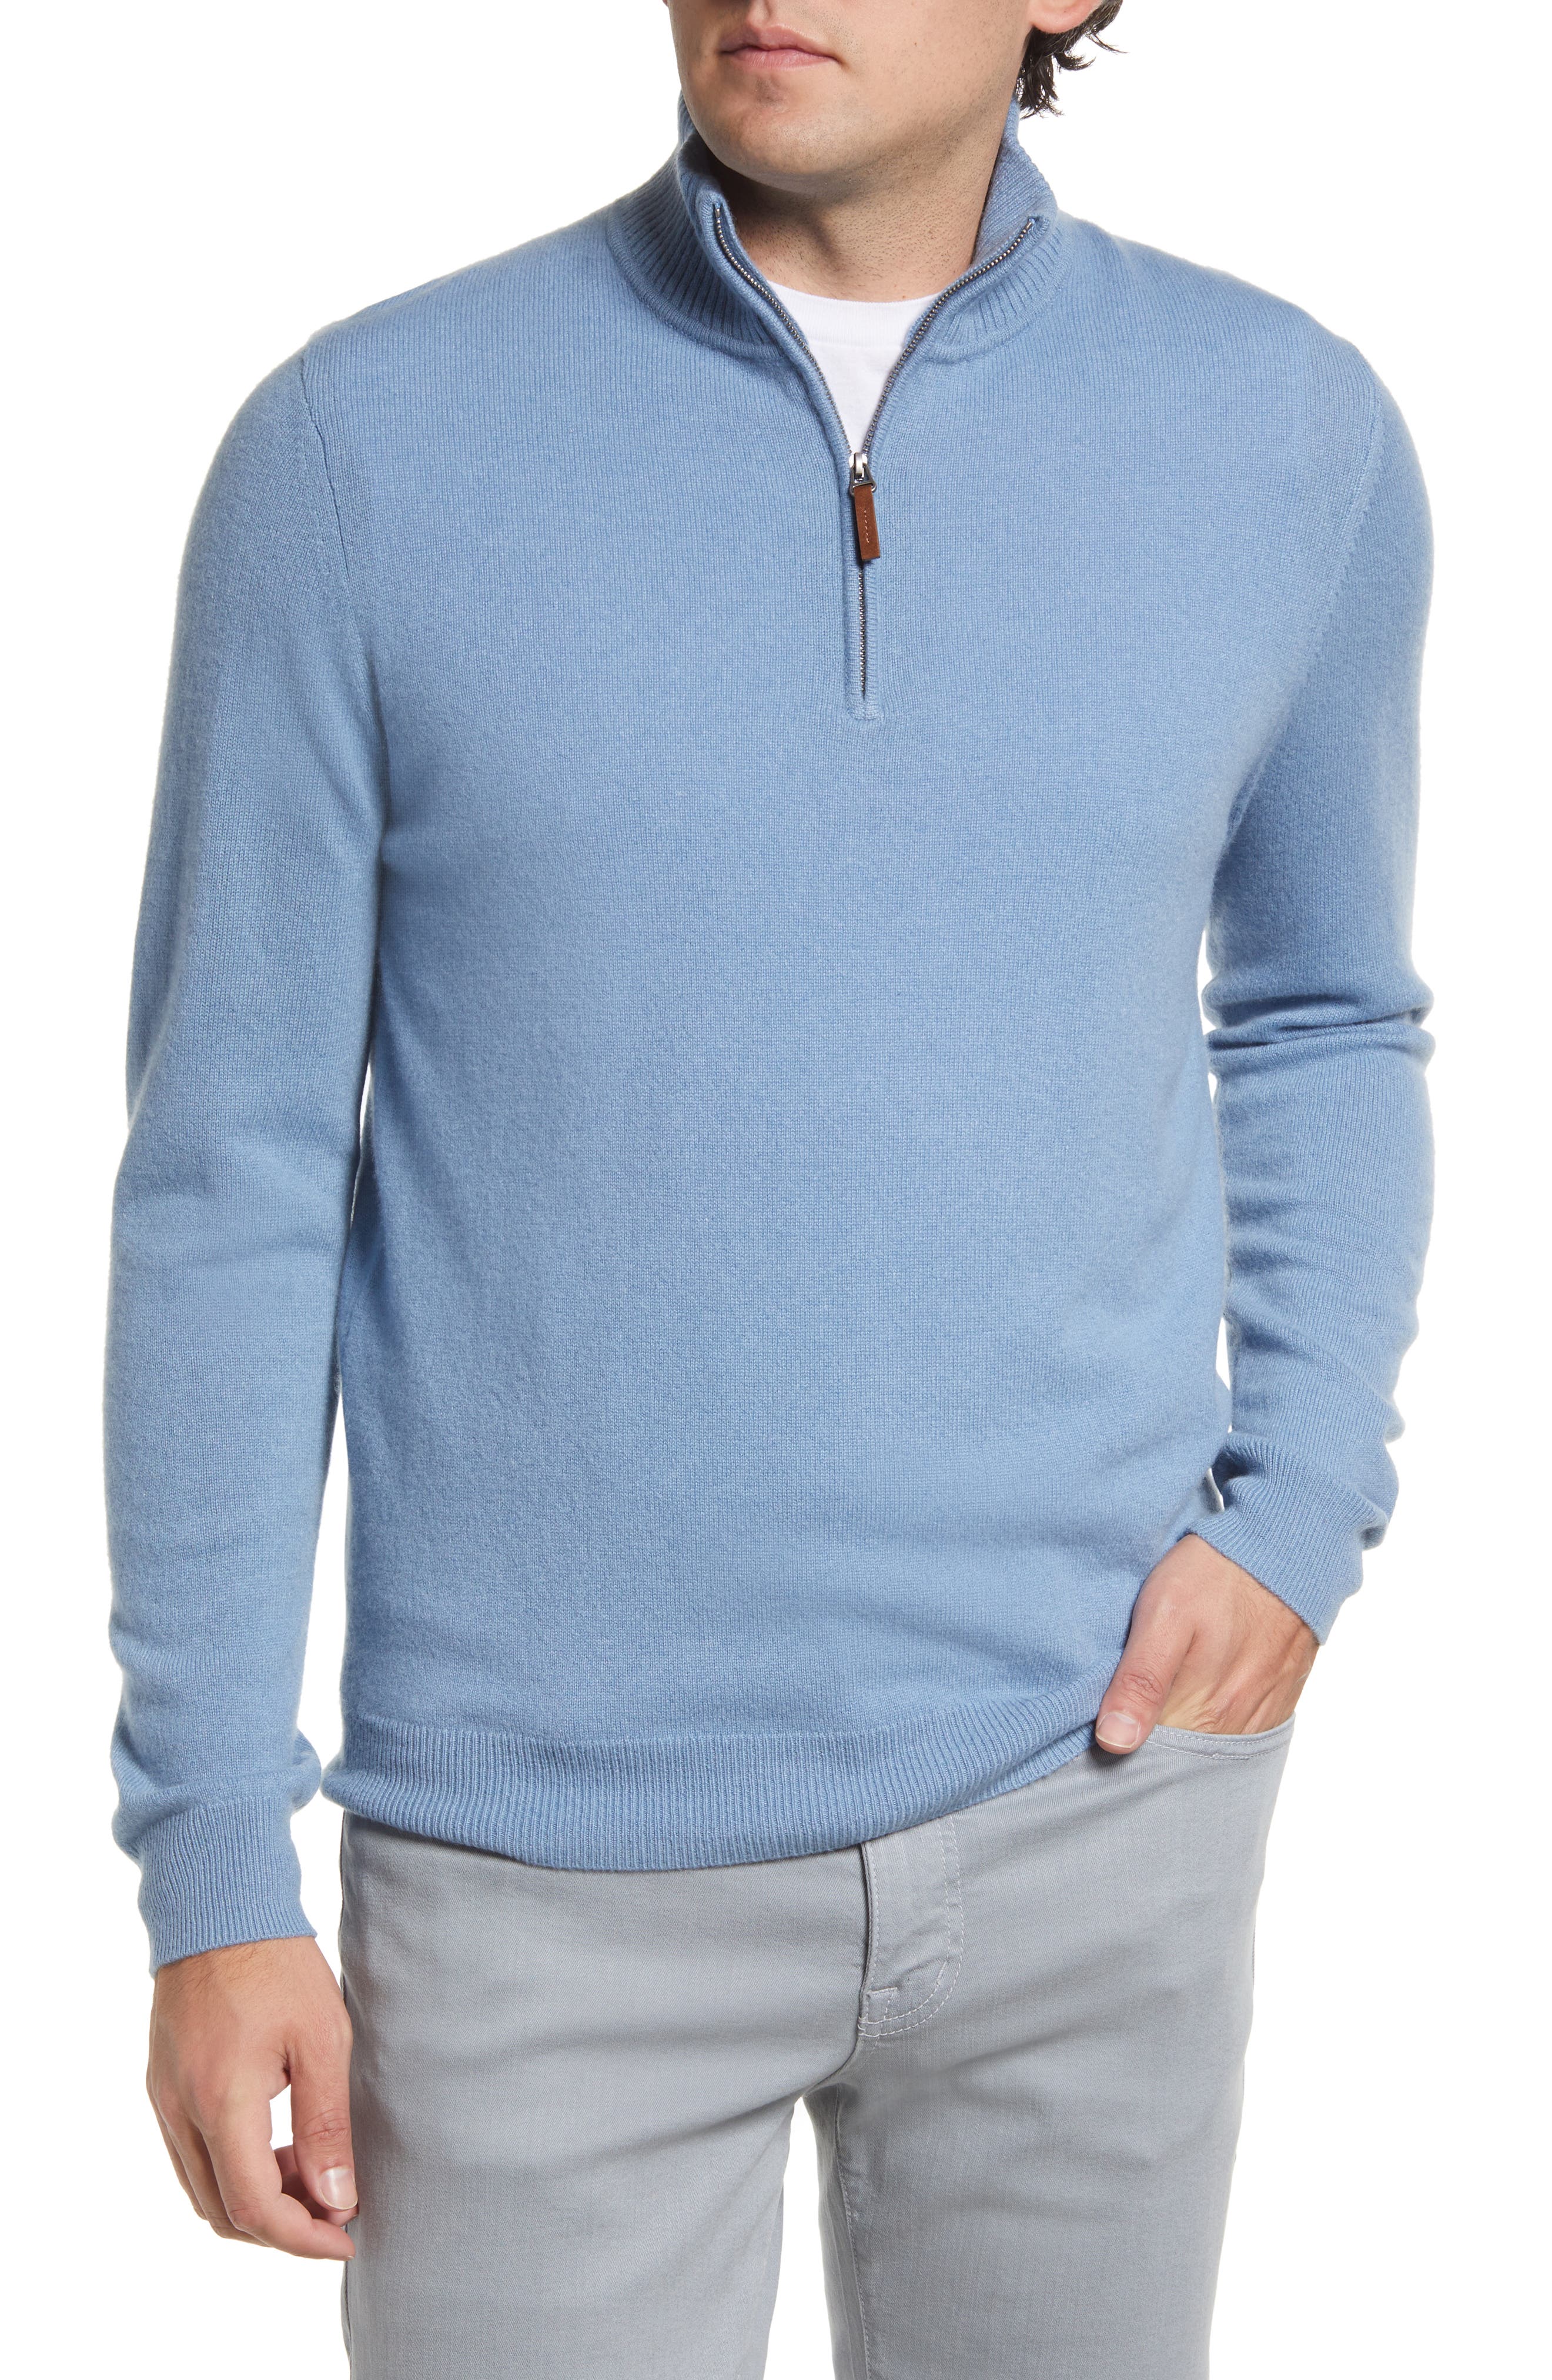 Malo Cashmere Jumper in Pastel Blue Mens Clothing Sweaters and knitwear Turtlenecks Blue for Men 